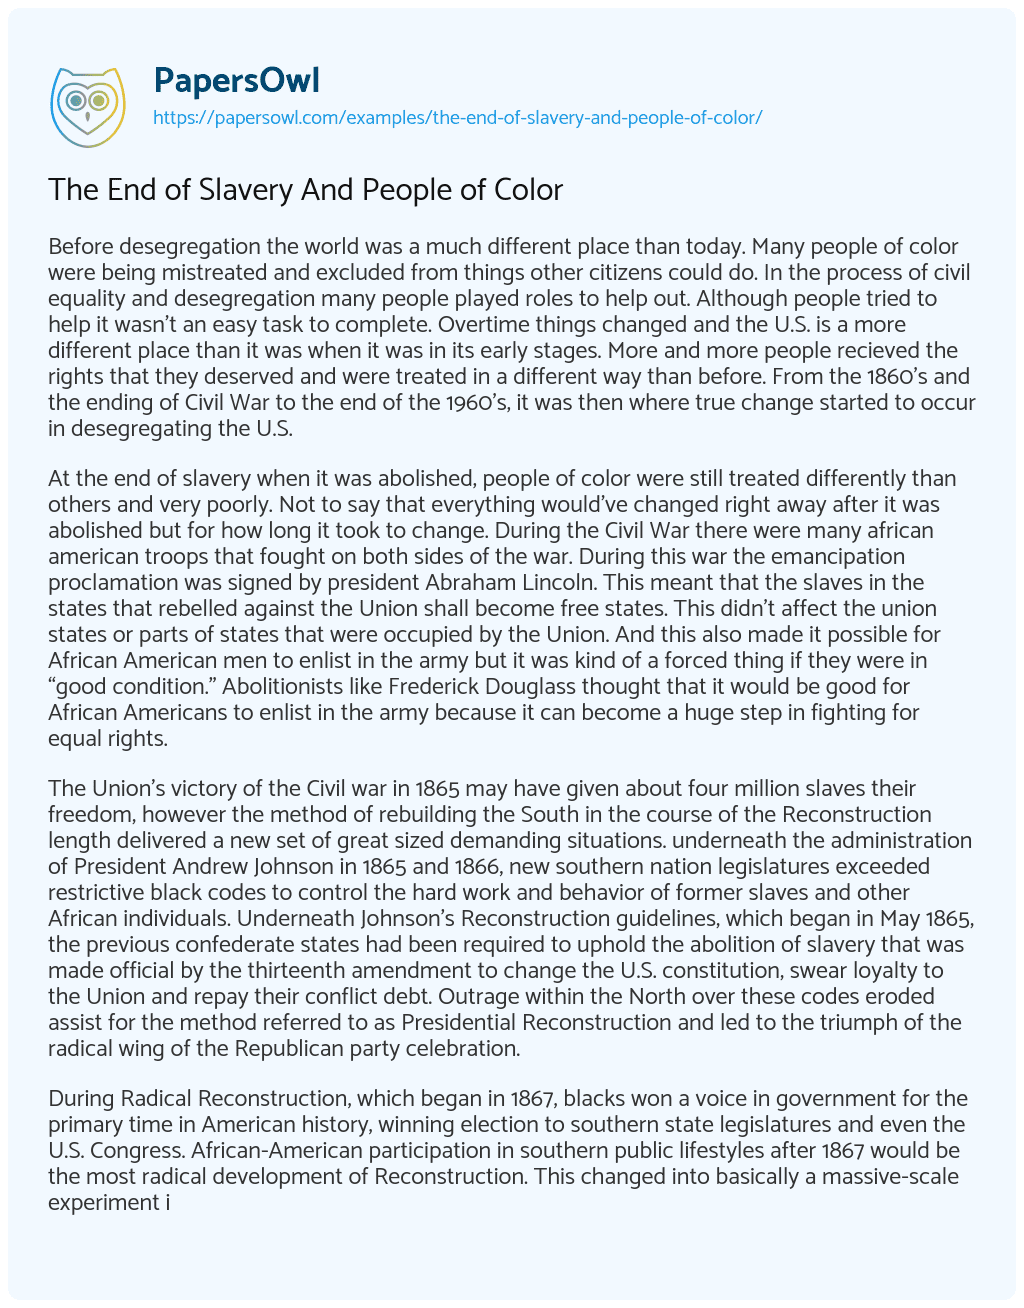 Essay on The End of Slavery and People of Color